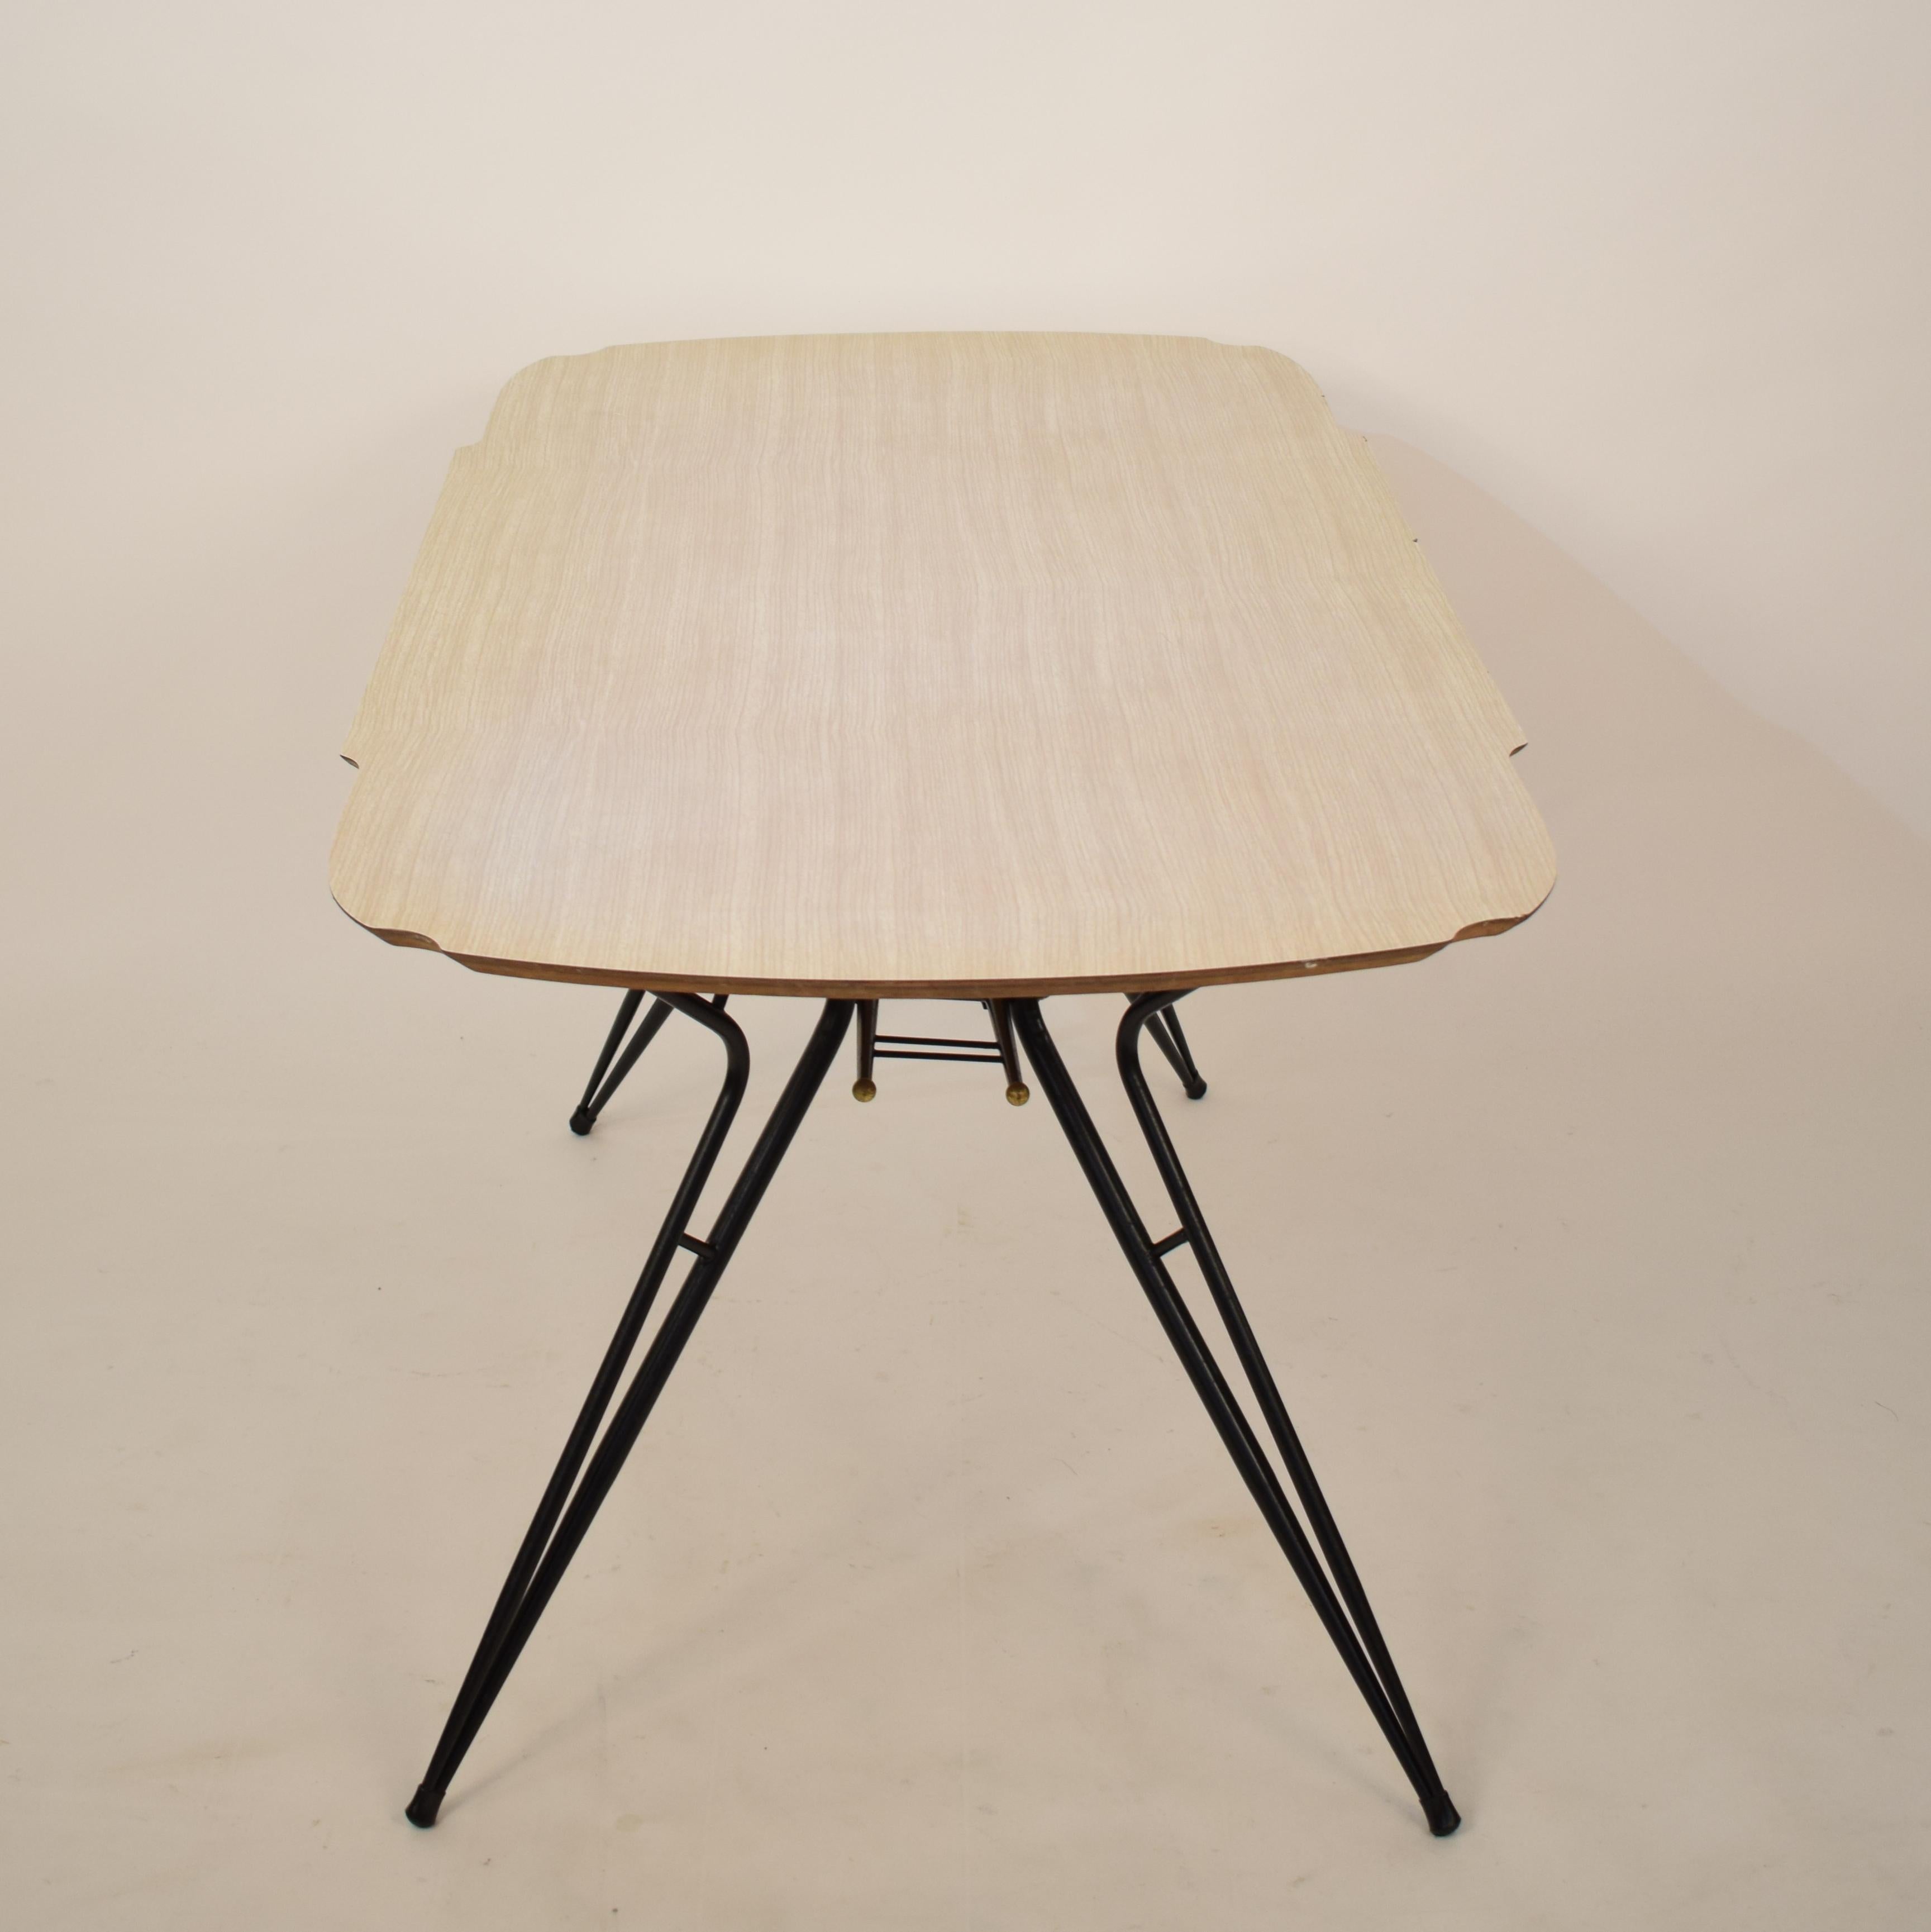 Midcentury Italian Black and White Dining Table Attributed to Ico Parisi, 1958 For Sale 7